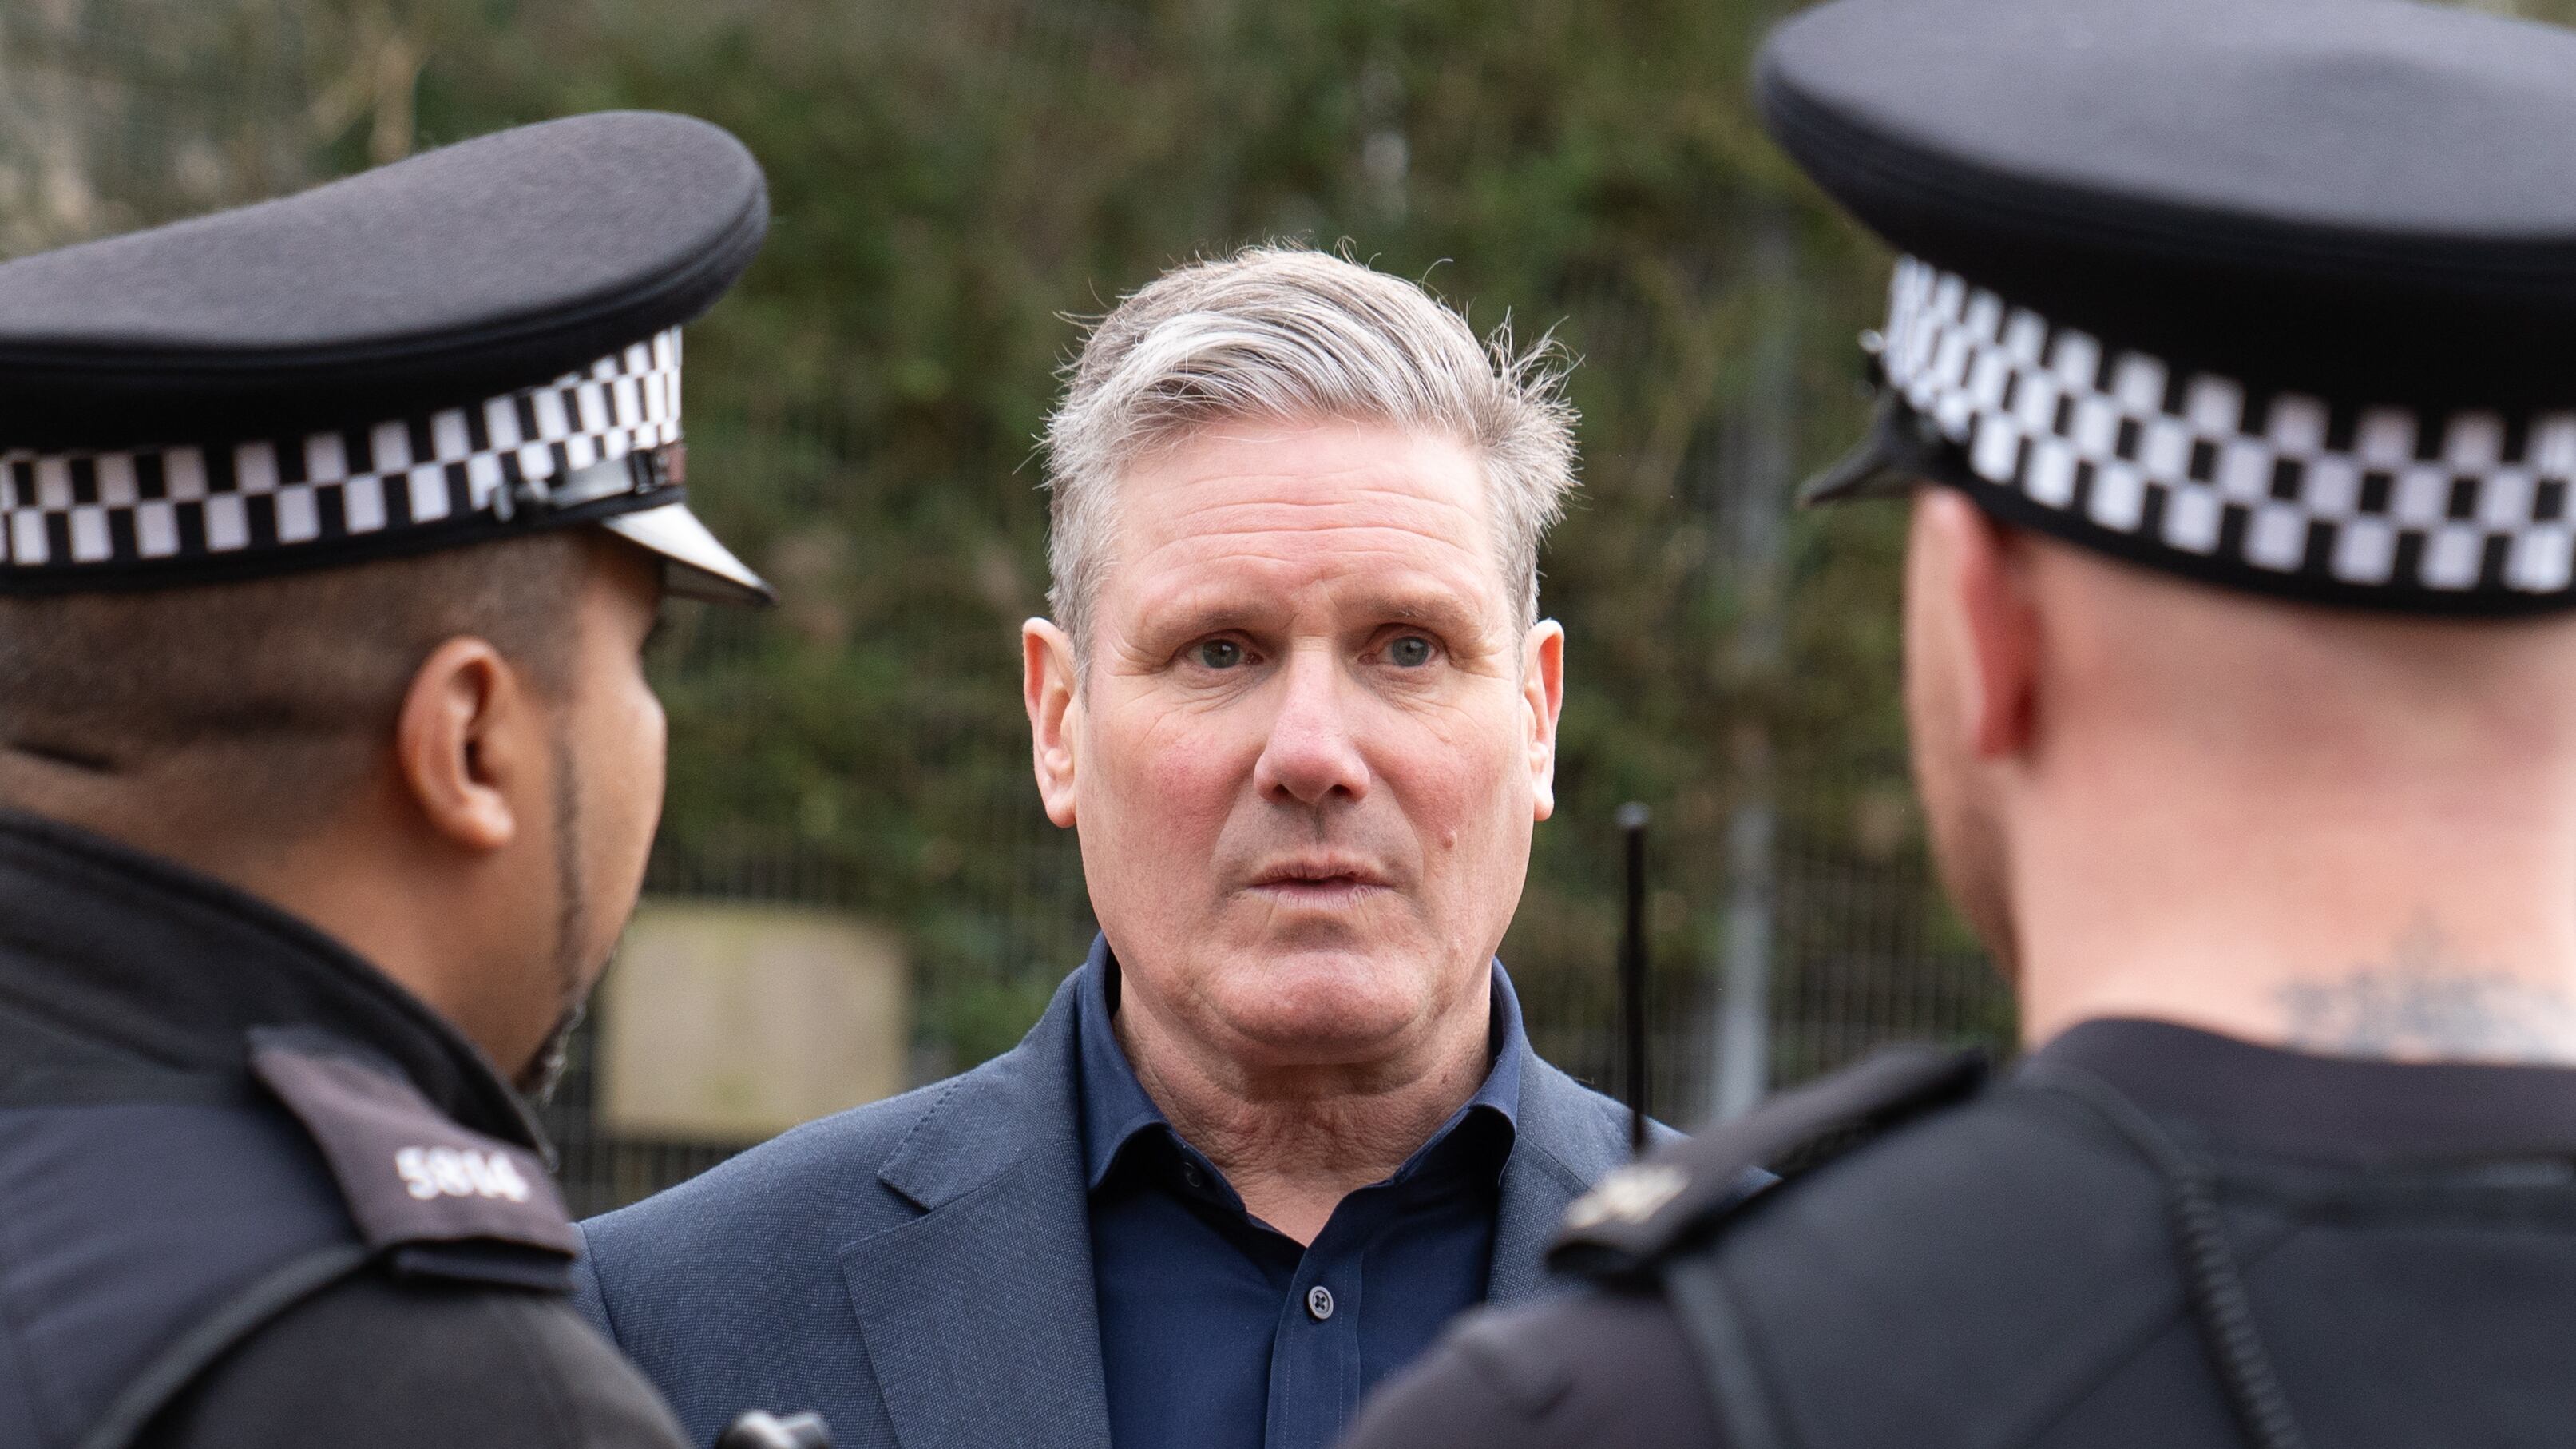 Labour leader Sir Keir Starmer has pledged to tackle knife crime